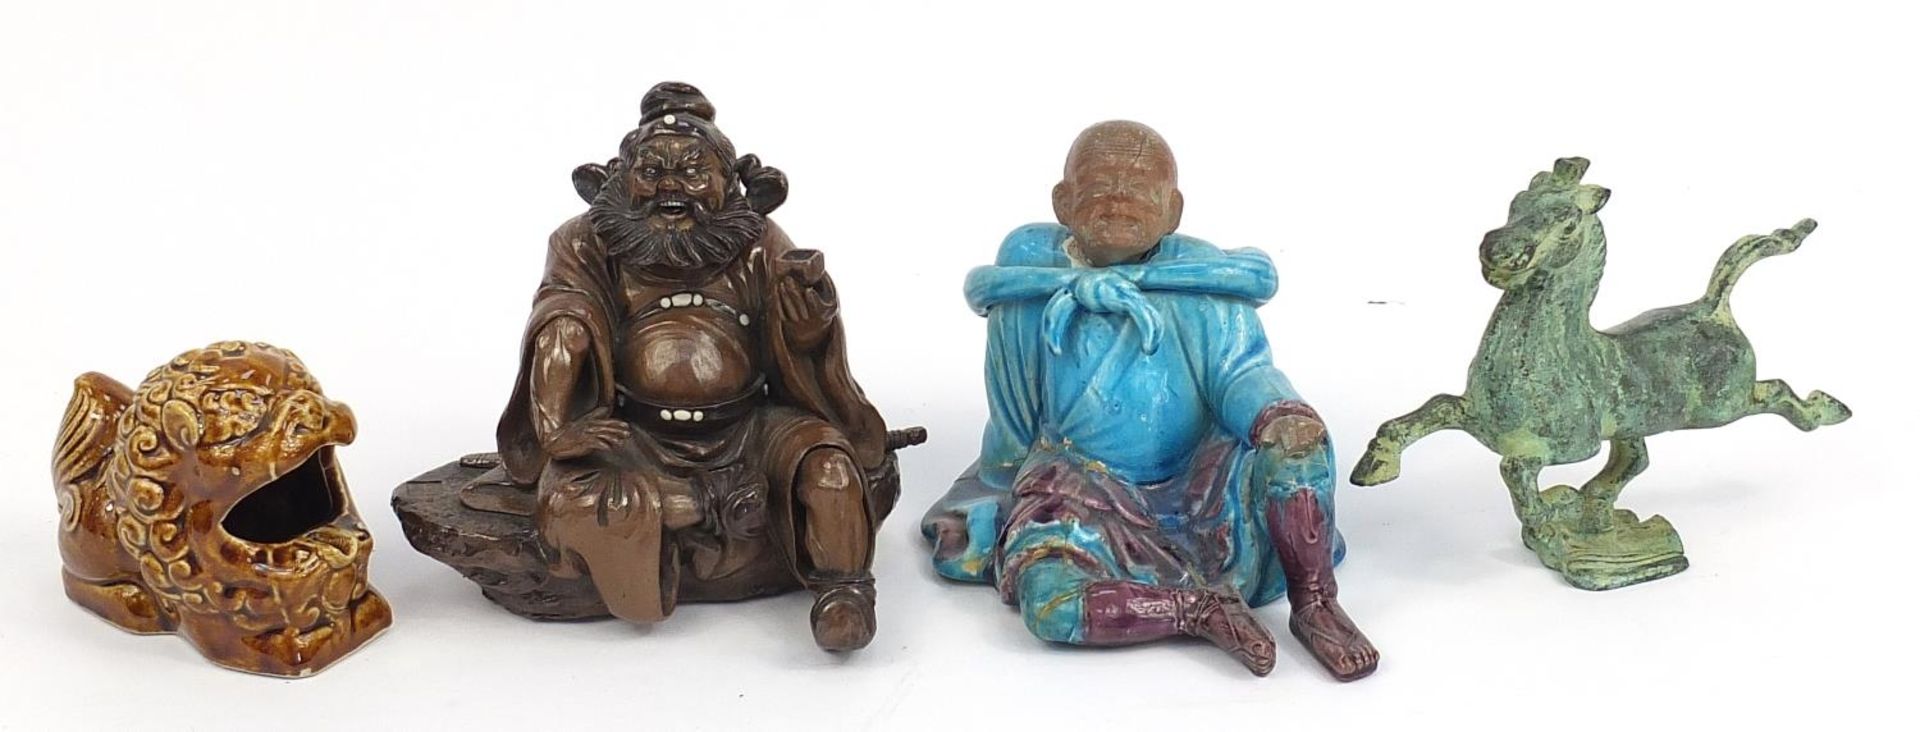 Two seated Chinese ceramic Elders, Foo dog and bronzed Tang style horse, the largest 19cm high